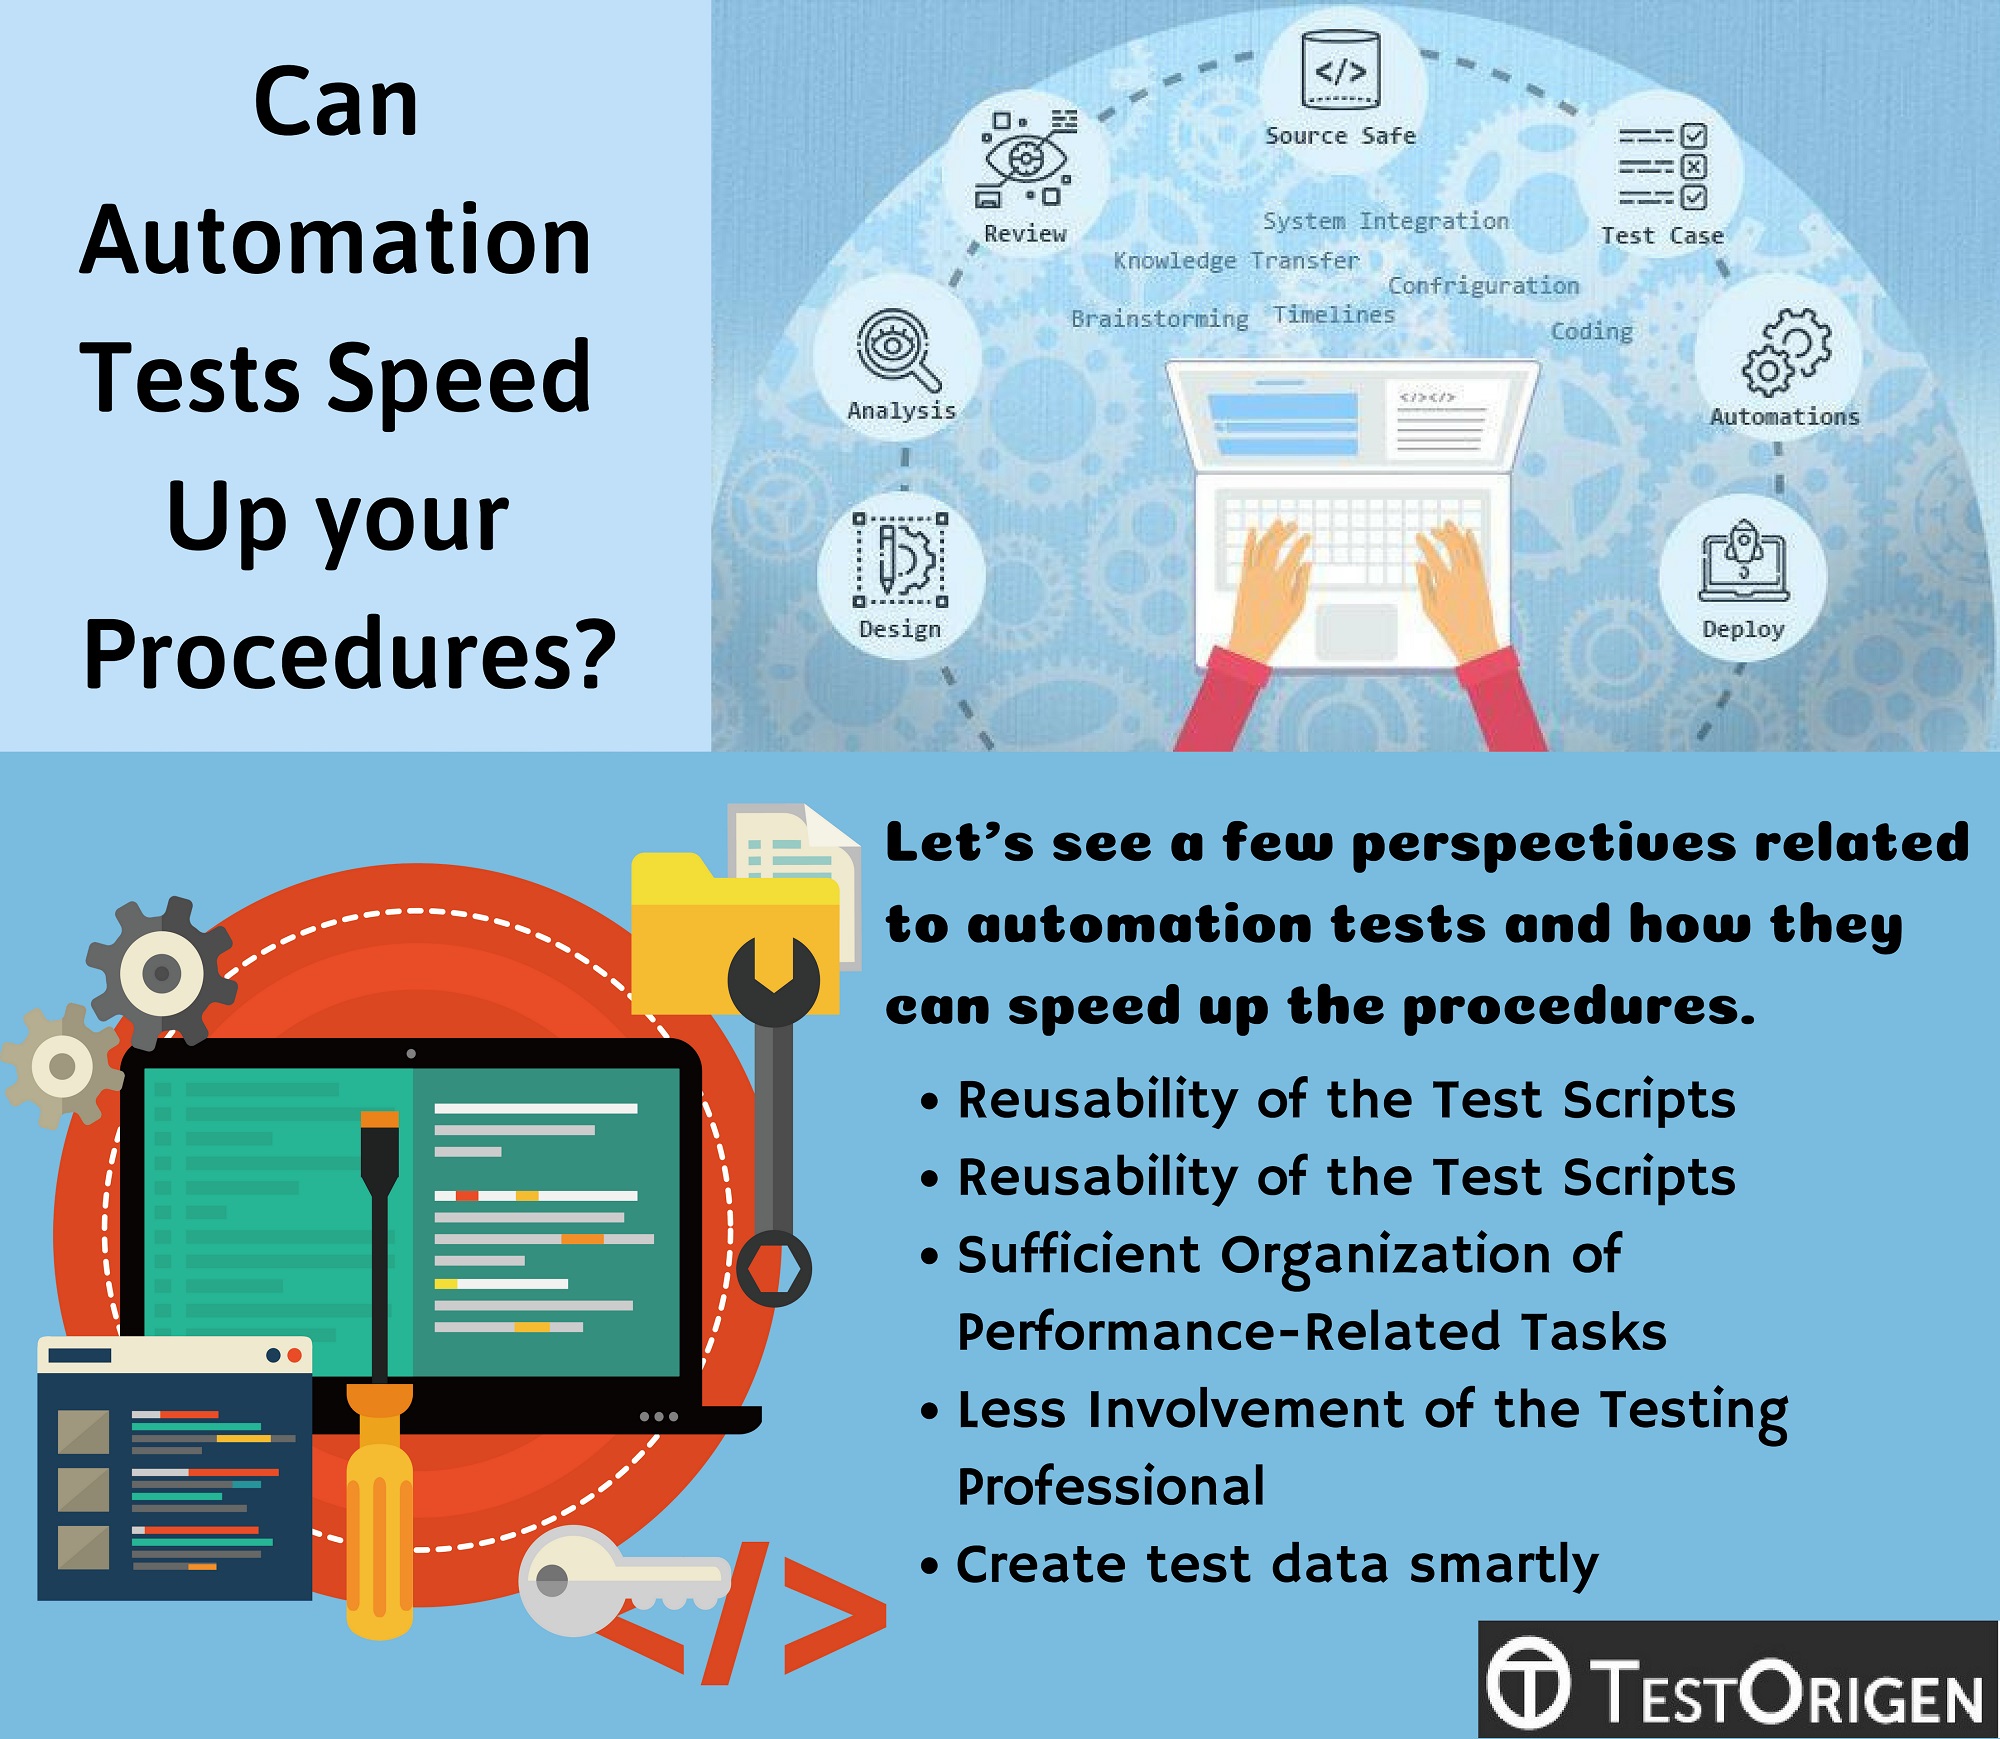 Can Automation Tests Speed Up your Procedures?